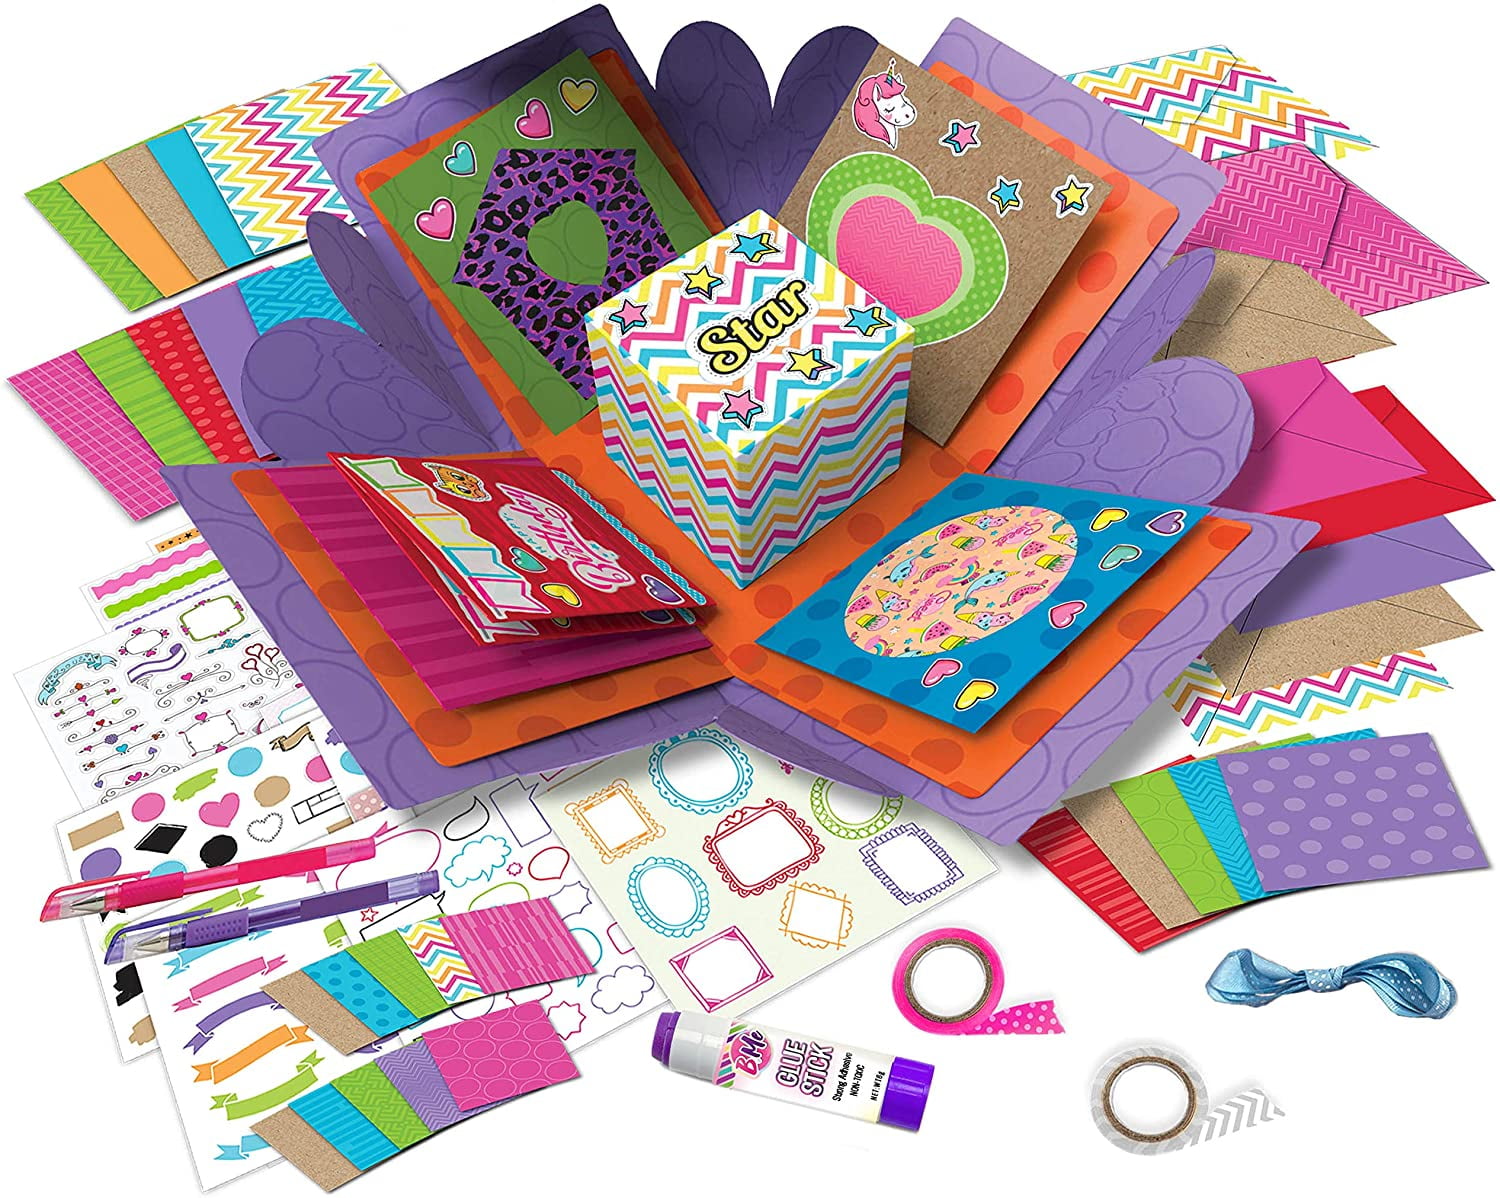 DIY Card Kit Set of 6 cards 2 styles embellishments and pre-cut pieces; 1 finished Birthday Card Making Kit ; includes envelopes